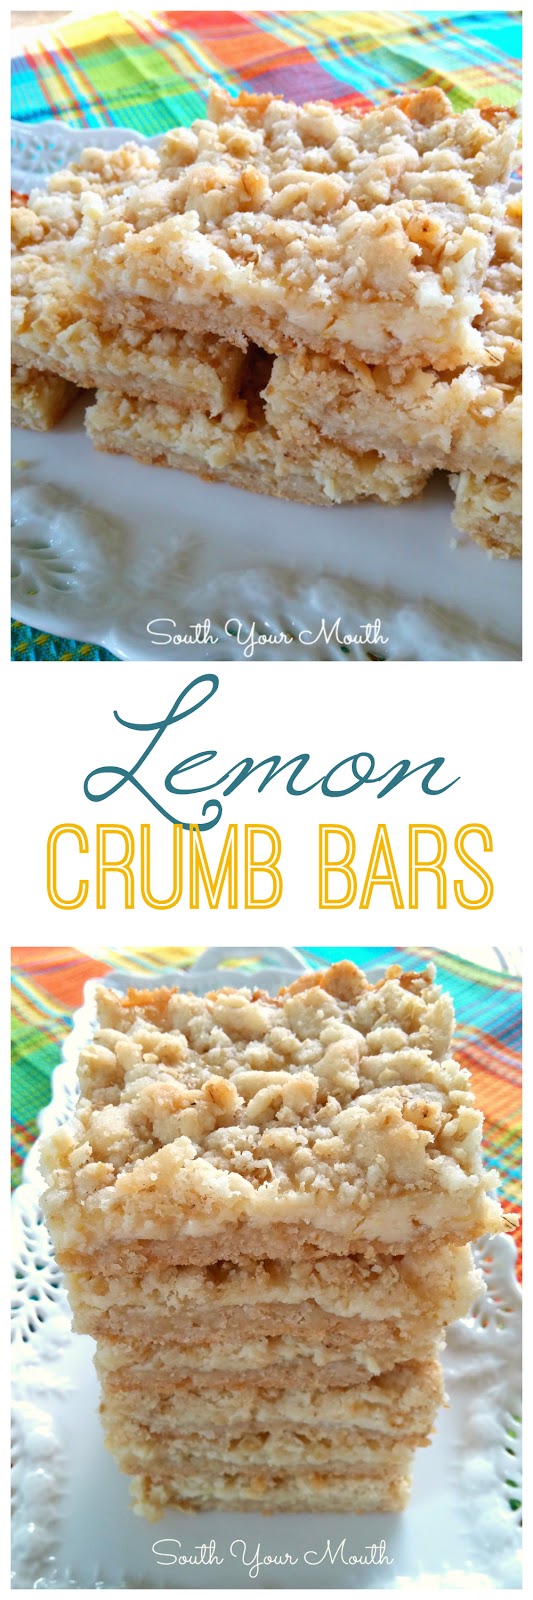 Lemon Crumb Bars - Just the right amount of sweetness with the tart lemons and a beautiful contrast in texture with the crumbly topping and creamy filling. So good!